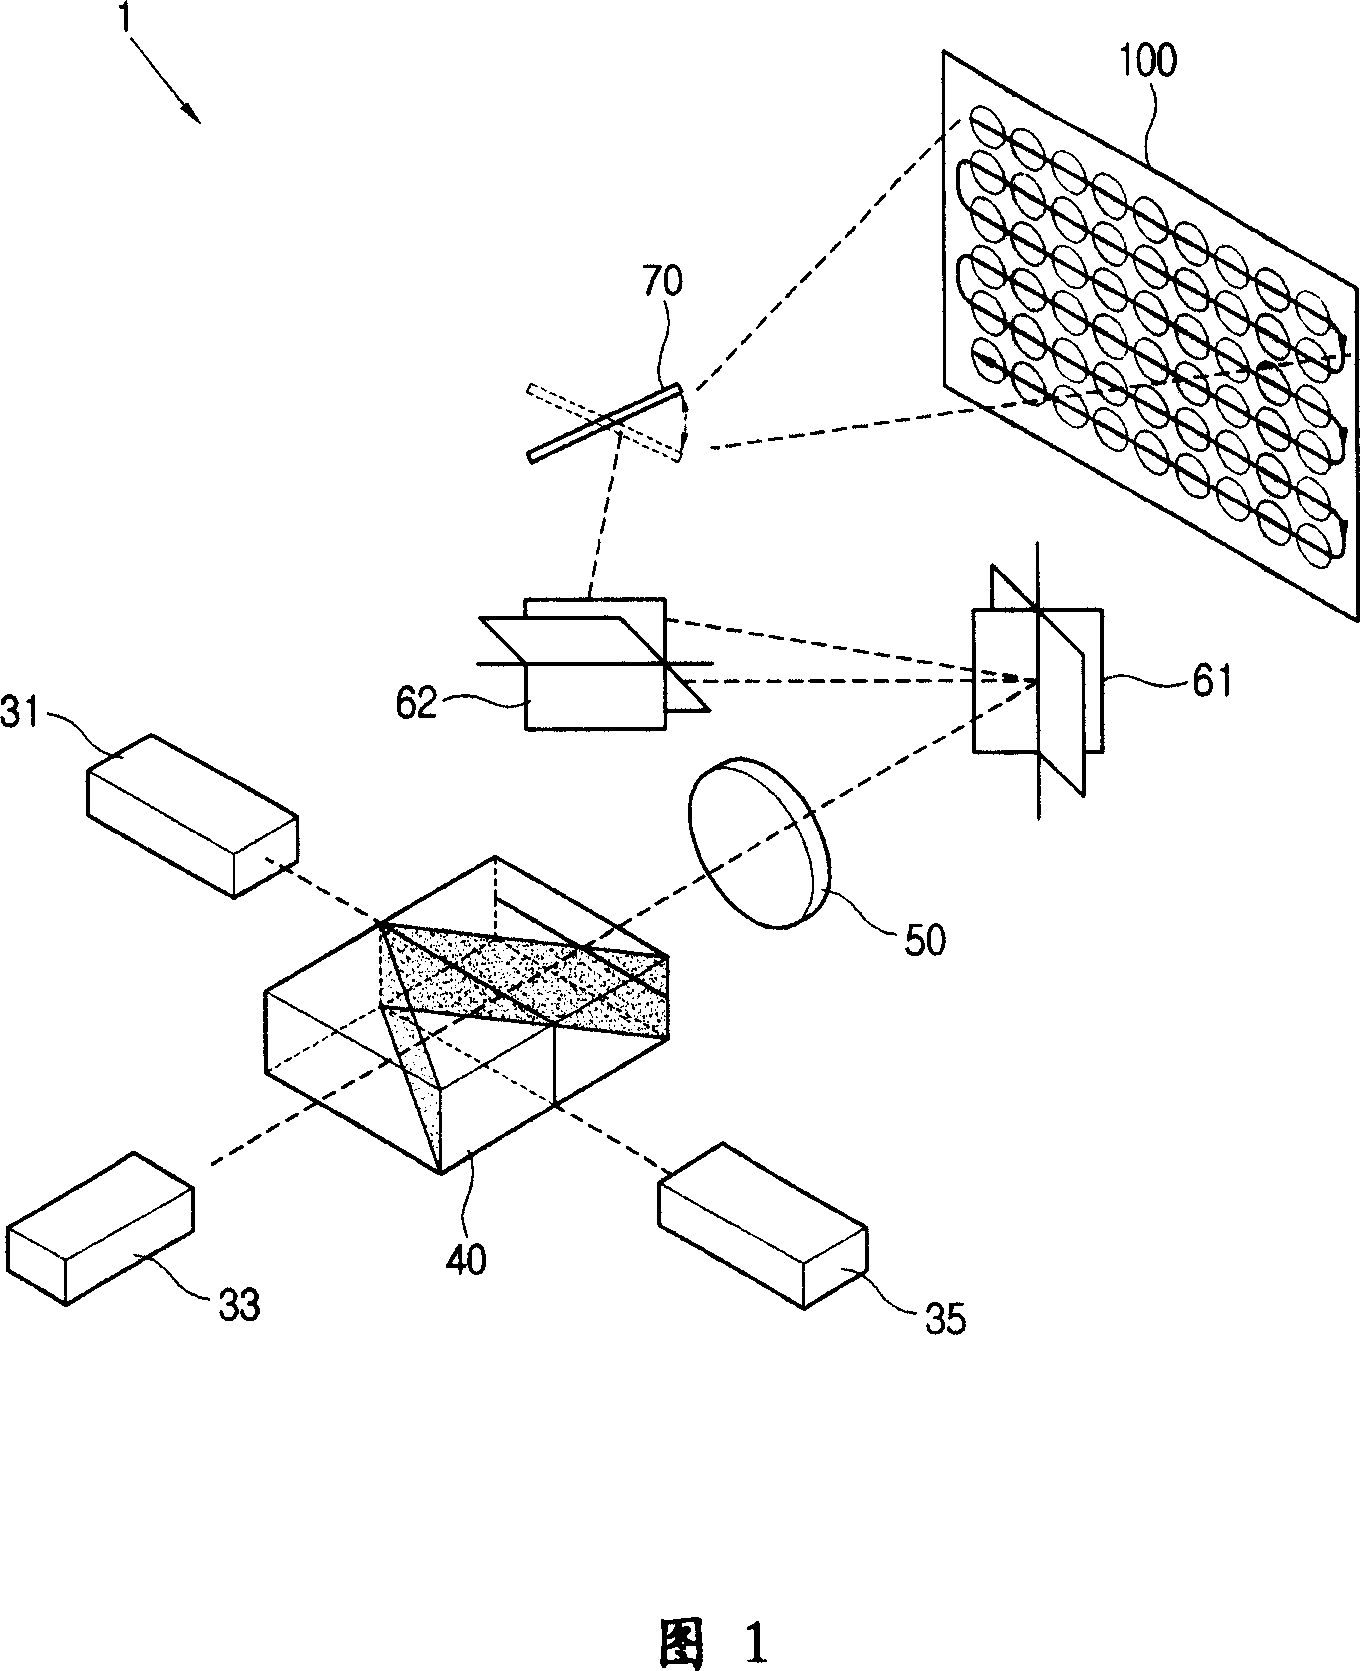 Display apparatus using laser and method of using the same